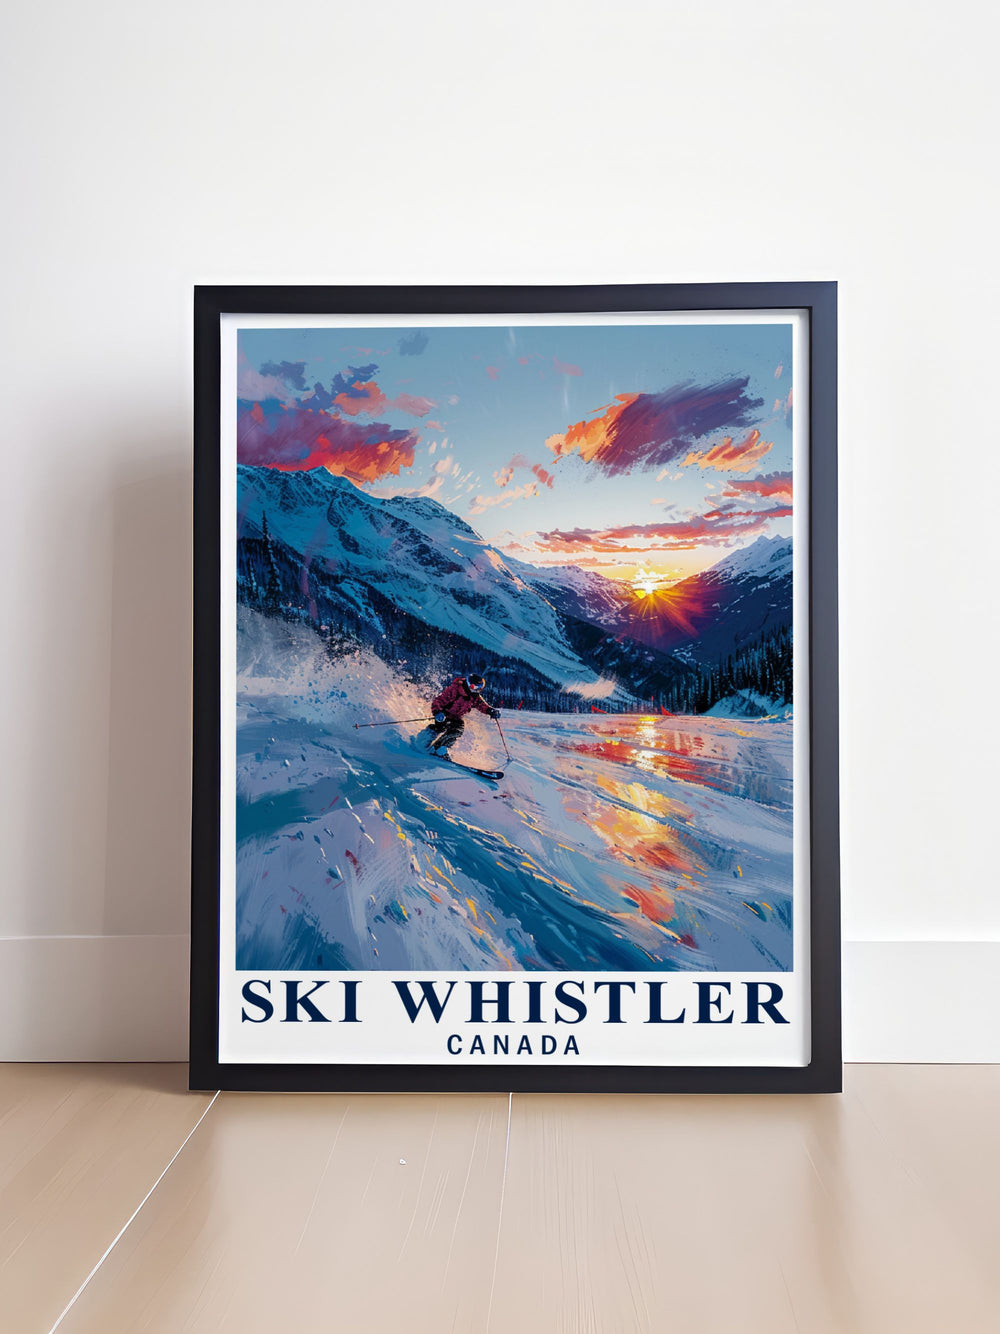 This vintage inspired poster of Whistler captures the dynamic atmosphere and scenic beauty of skiing in the Canadian Rockies, offering a glimpse into one of North Americas top winter destinations.